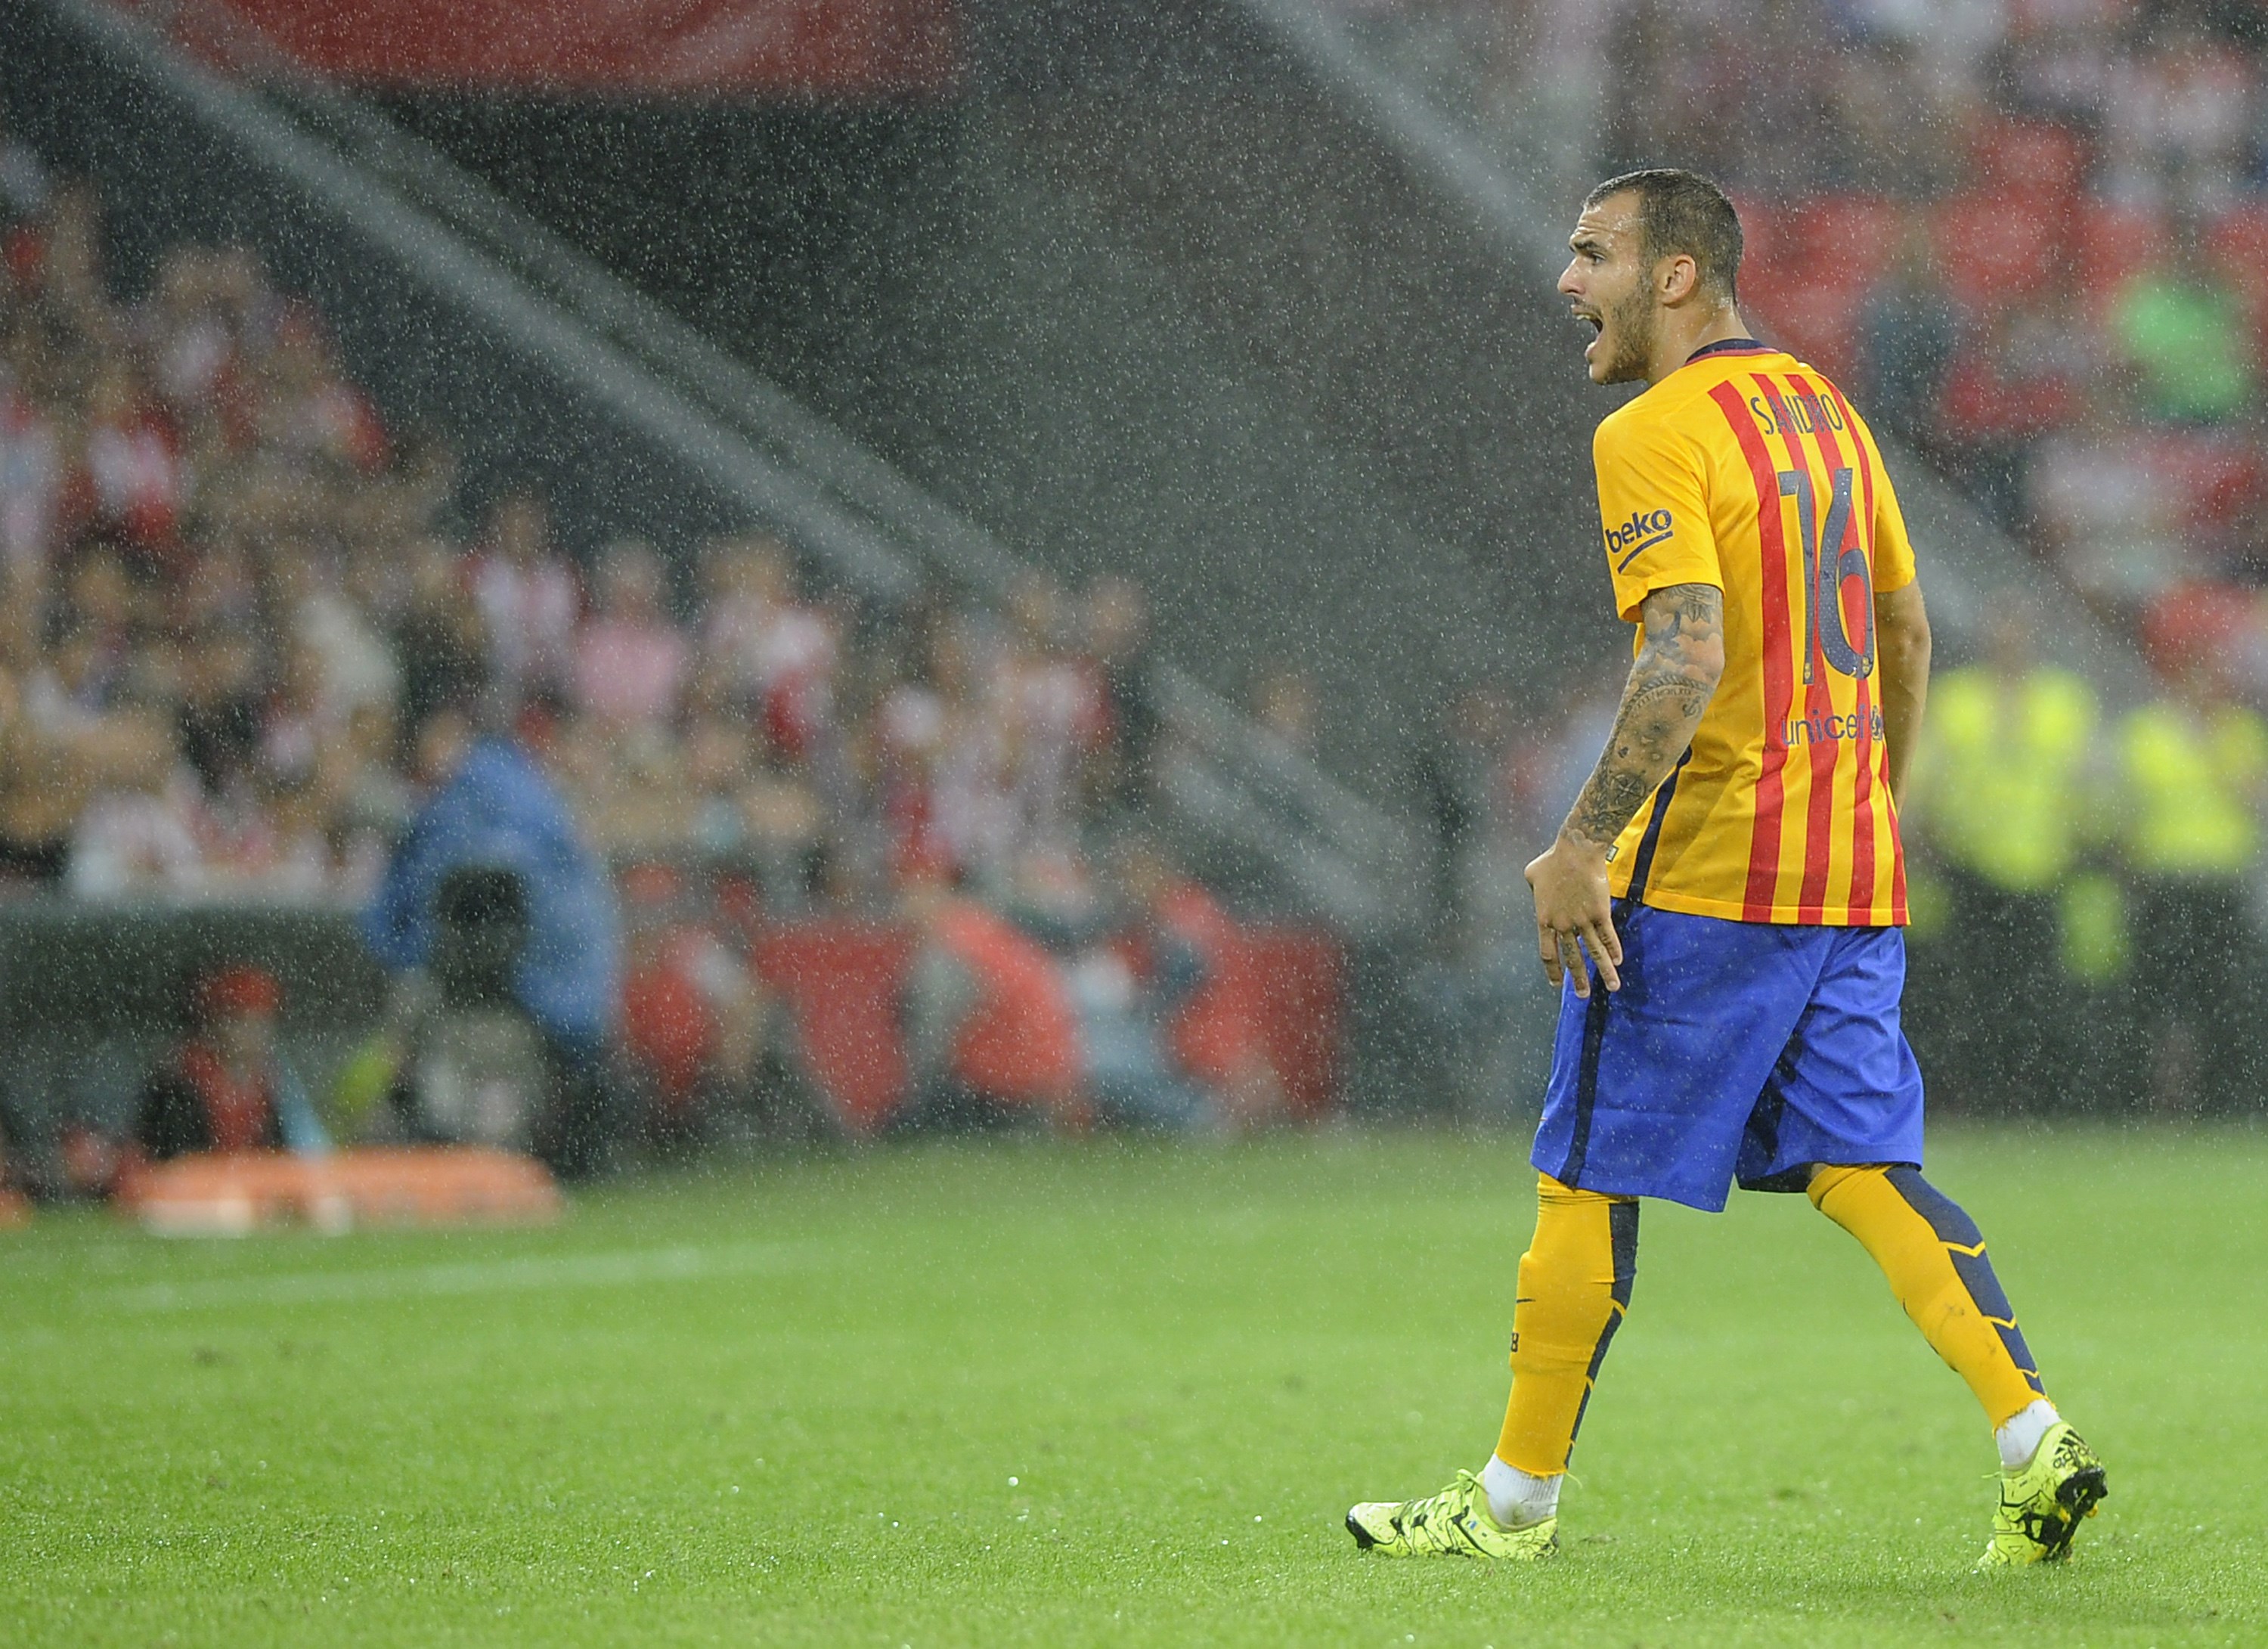 Barcelona's Brazilian defender Douglas shouts during the Spanish Supercup first-leg football match Athletic Club Bilbao vs FC Barcelona at the San Mames stadium in Bilbao on August 14, 2015. Athletic Bilbao won the match 4-0. AFP PHOTO/ ANDER GILLENEA        (Photo credit should read ANDER GILLENEA/AFP/Getty Images)